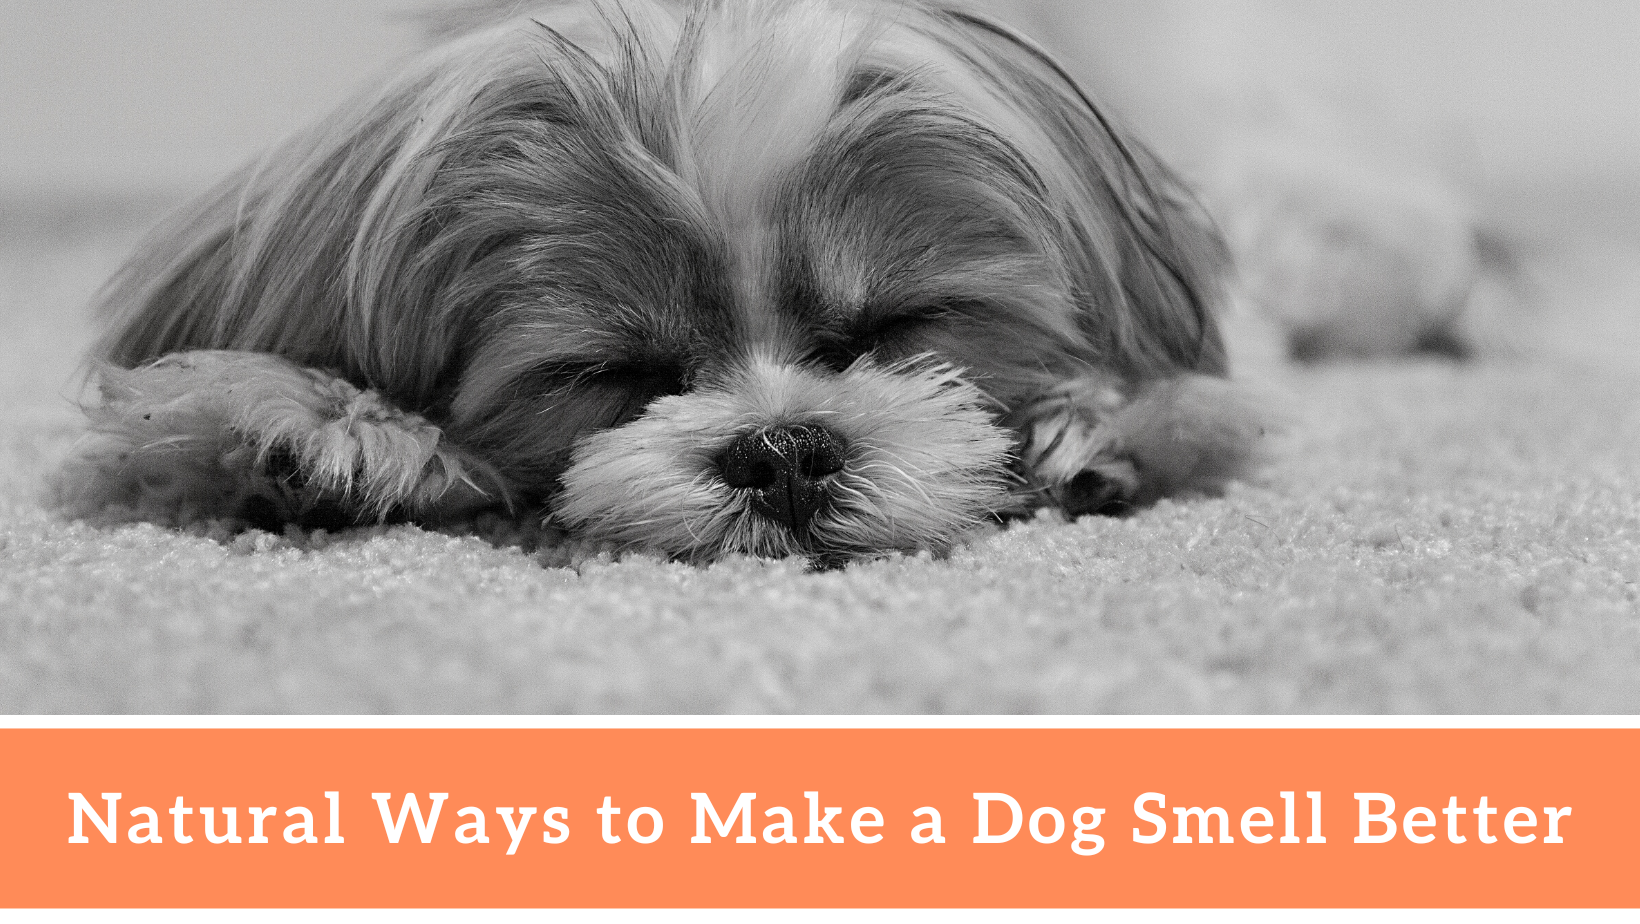 Natural Ways to Make a Dog Smell Better